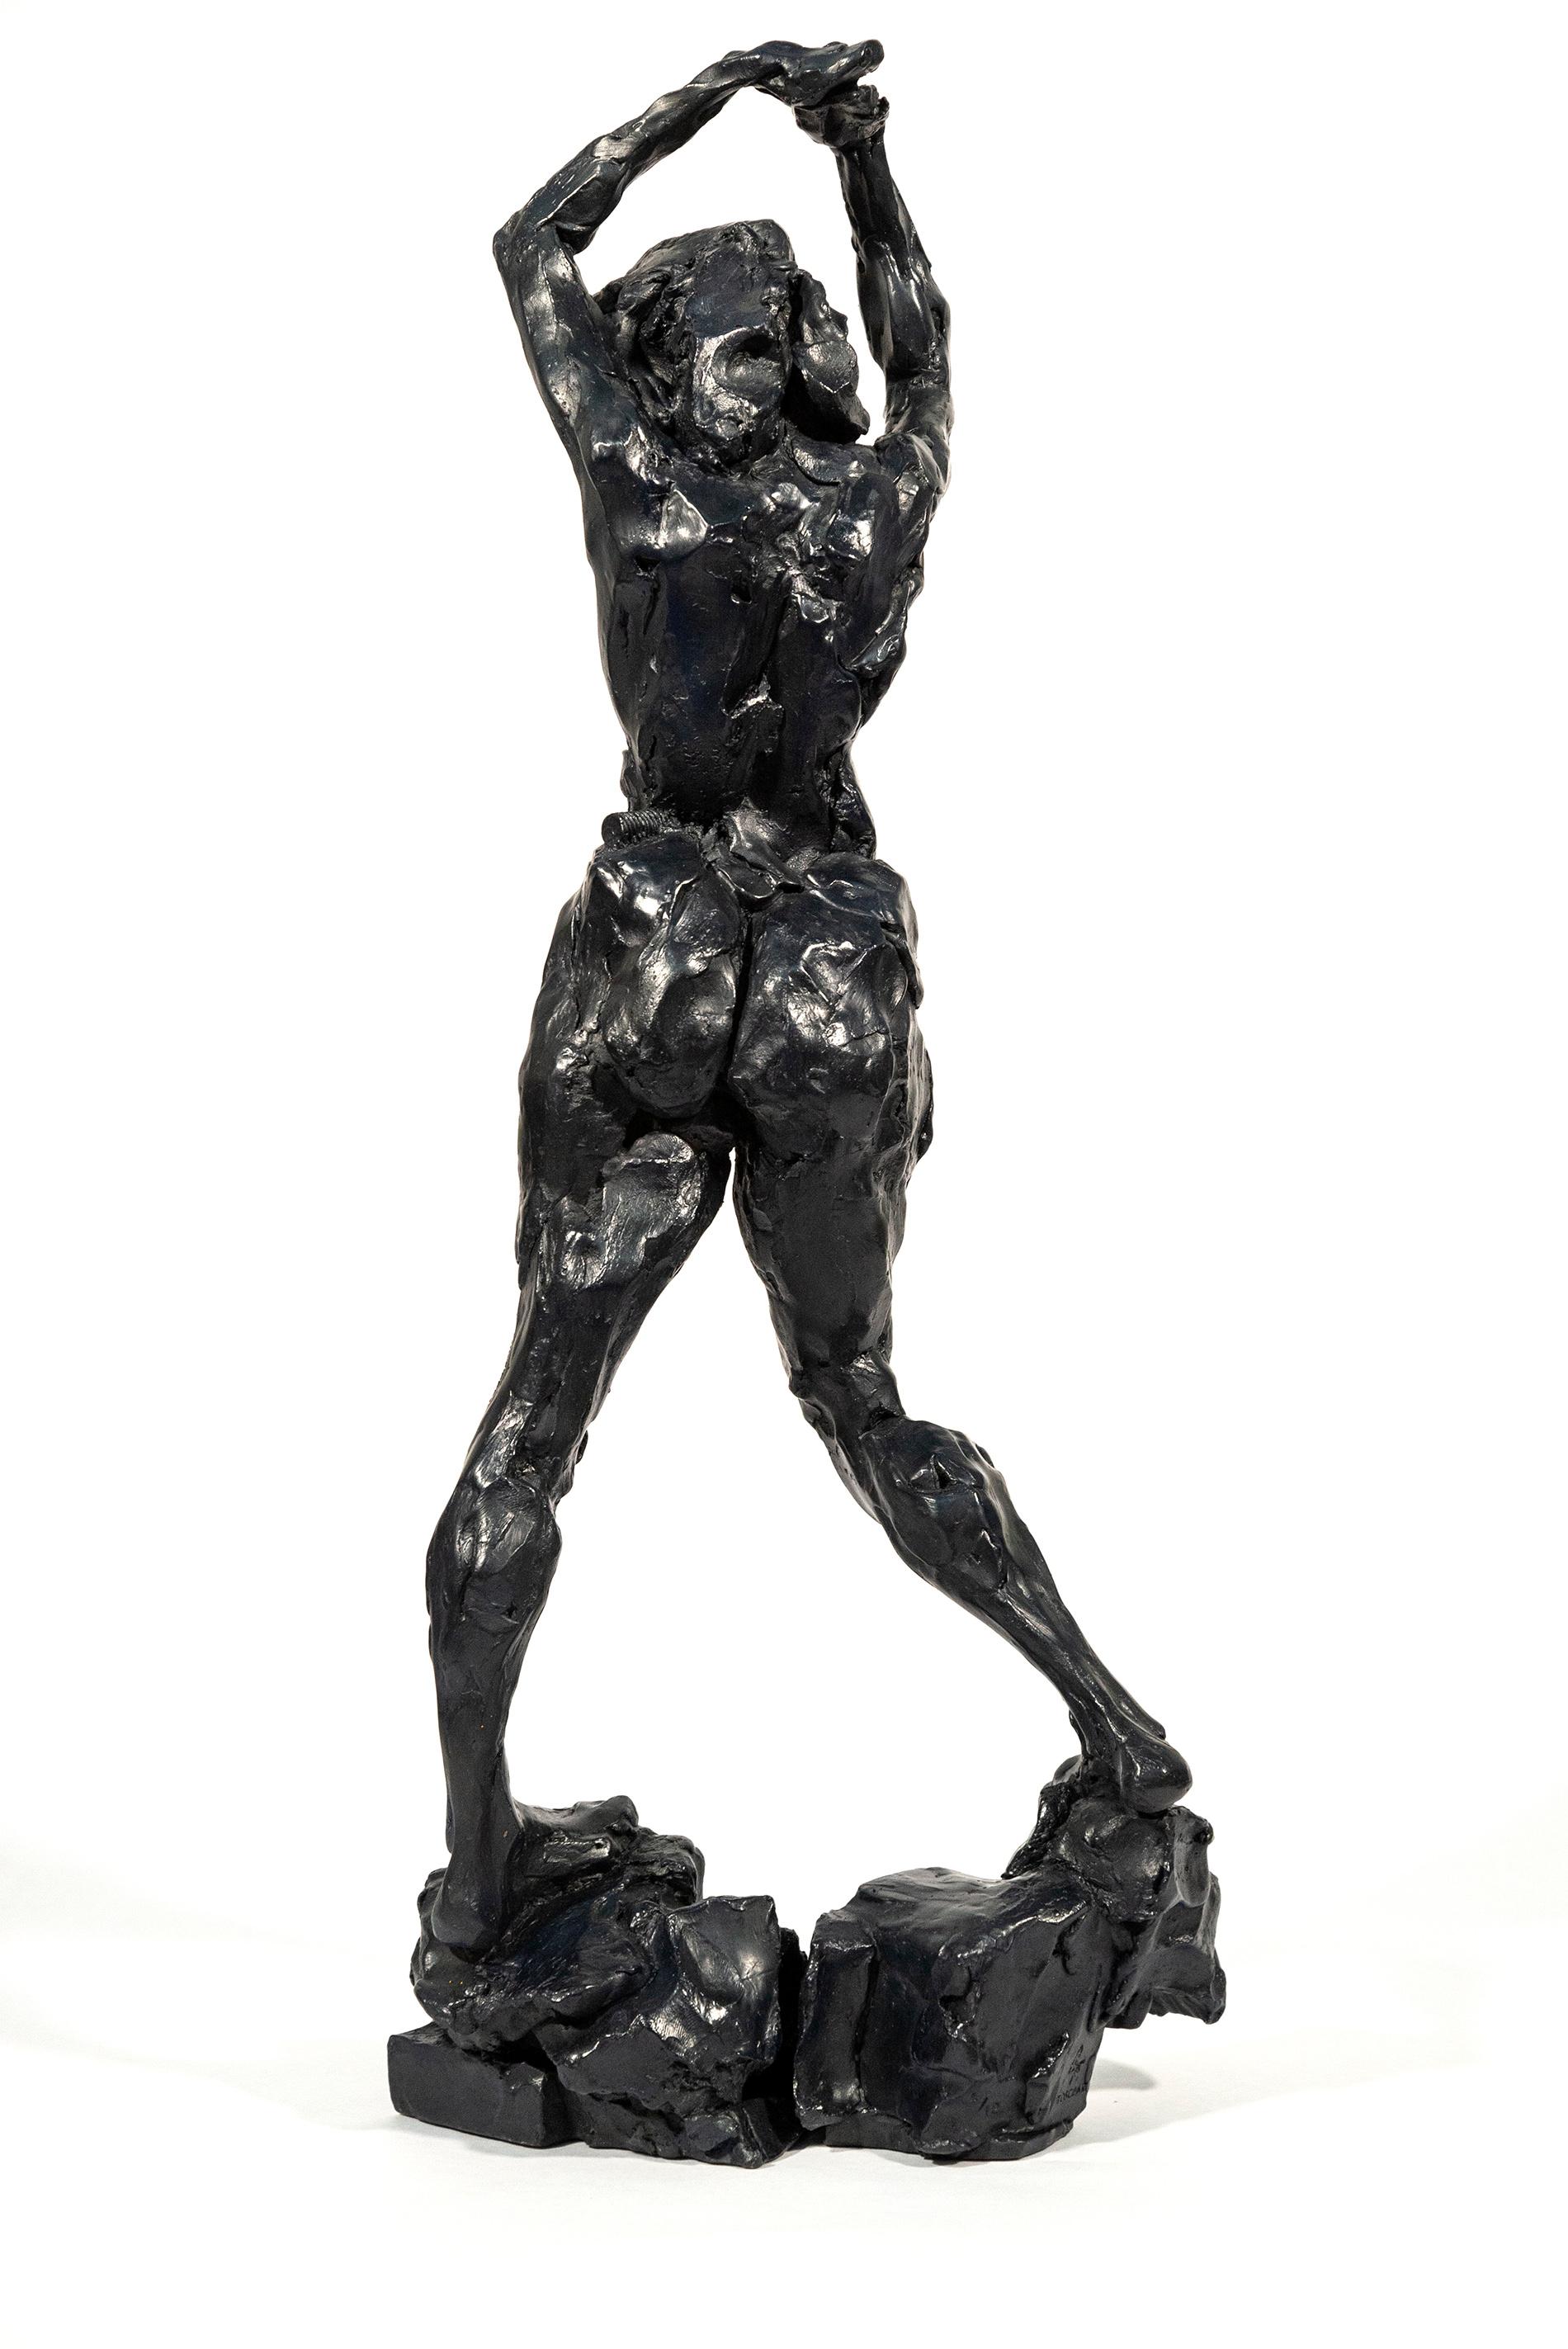 Canadian artist Richard Tosczak captures the beauty and elegance of the human form in his sculptures. This piece shows a nude female in a strong pose, arms raised above her head. Masterfully cast in bronze, in an edition of 12.
 
“The figurative